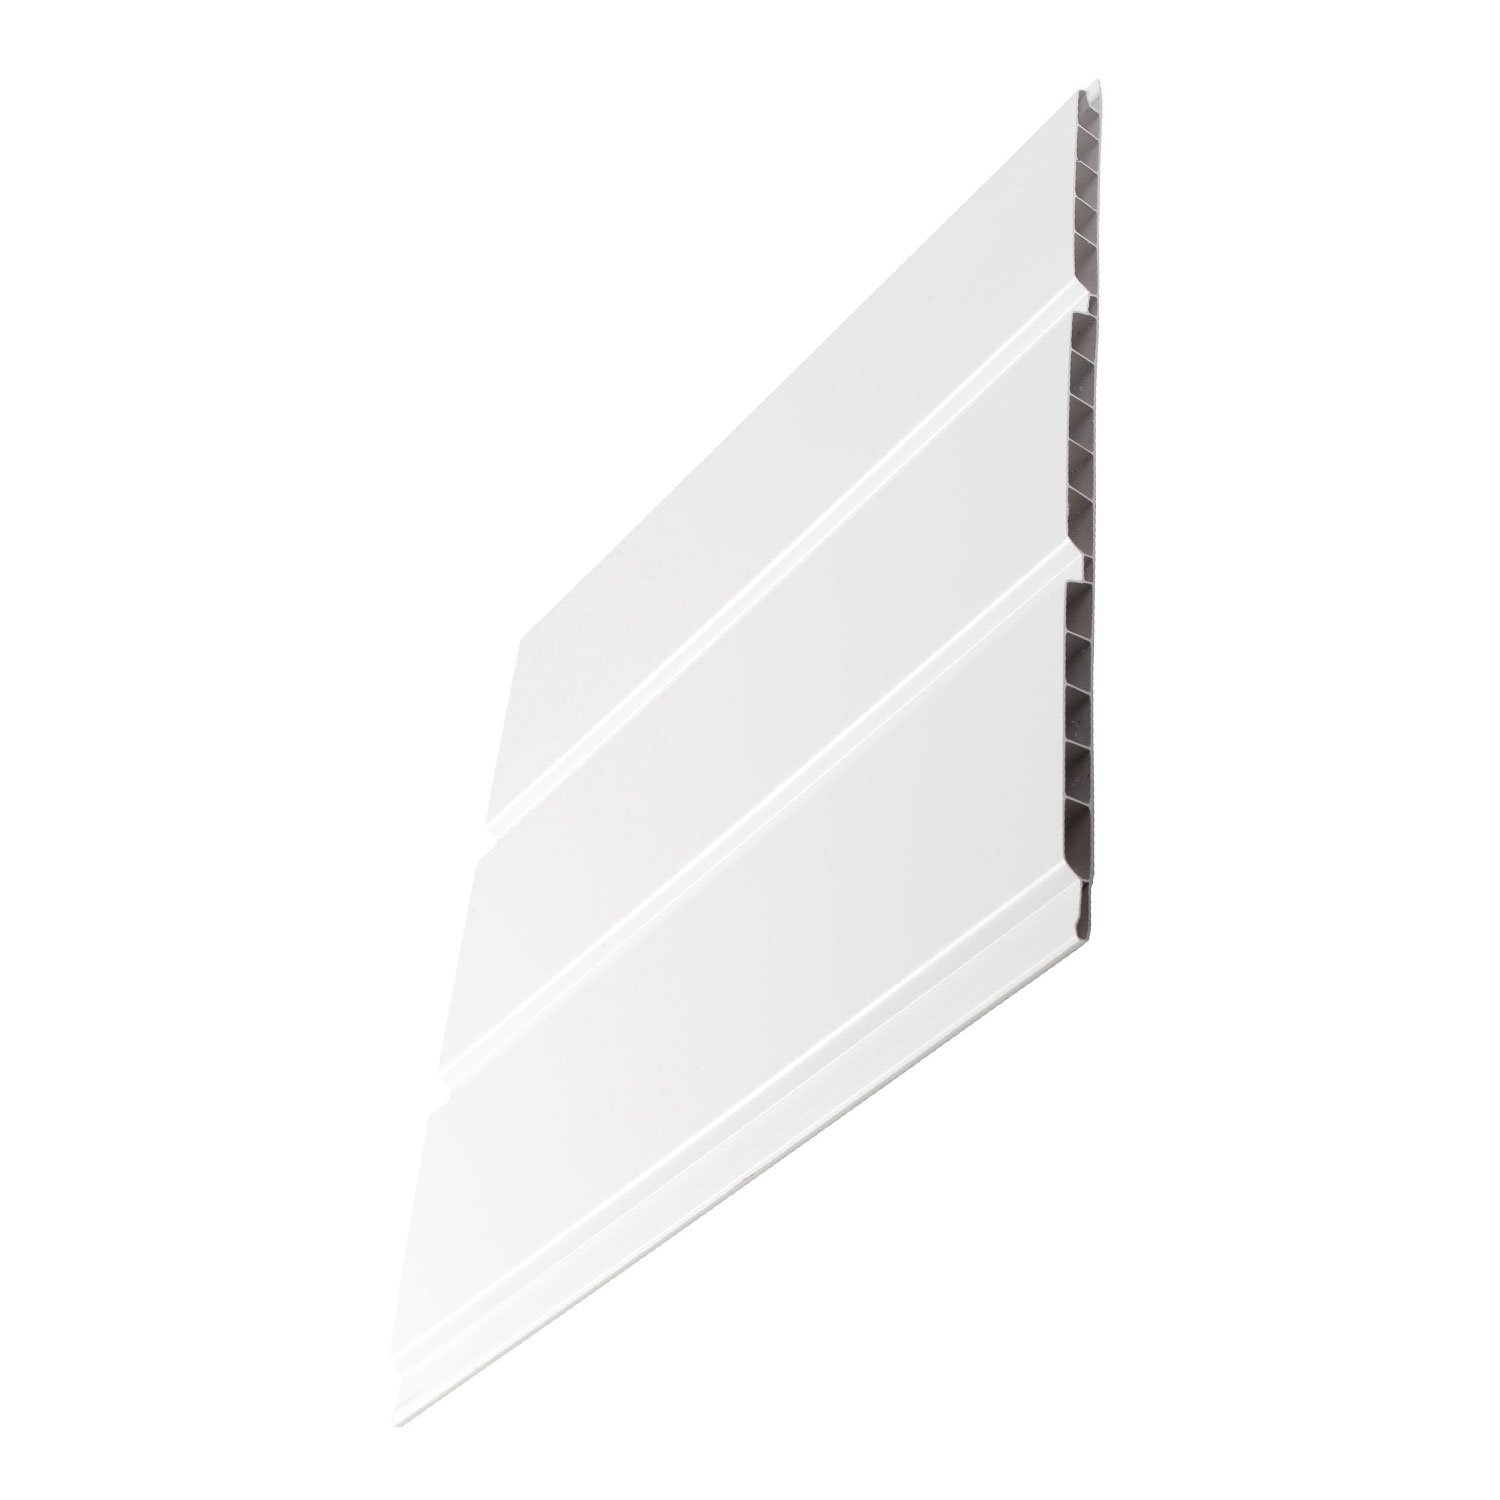 9mm White Hollow Soffit Boards